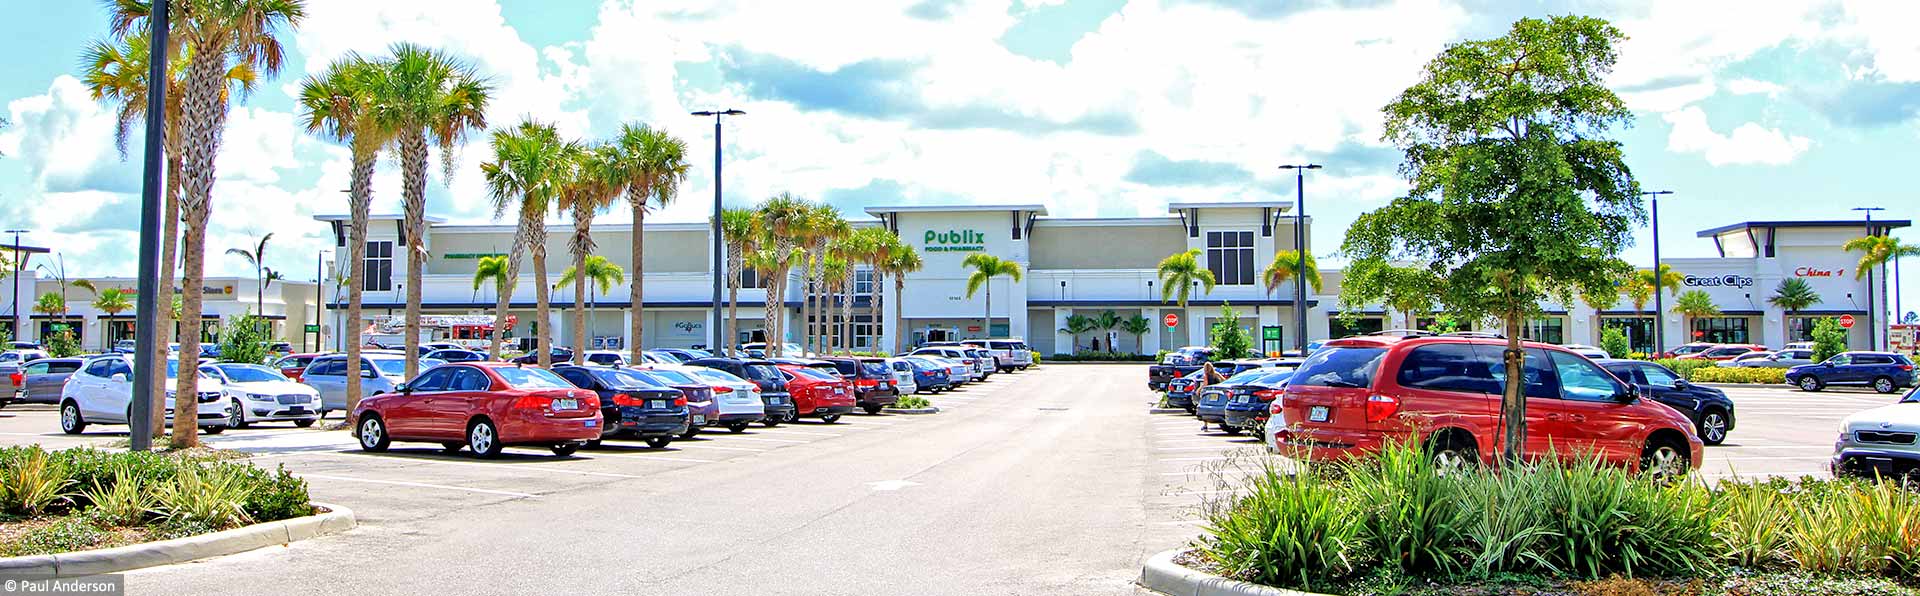 Publix grocery store and shoppes